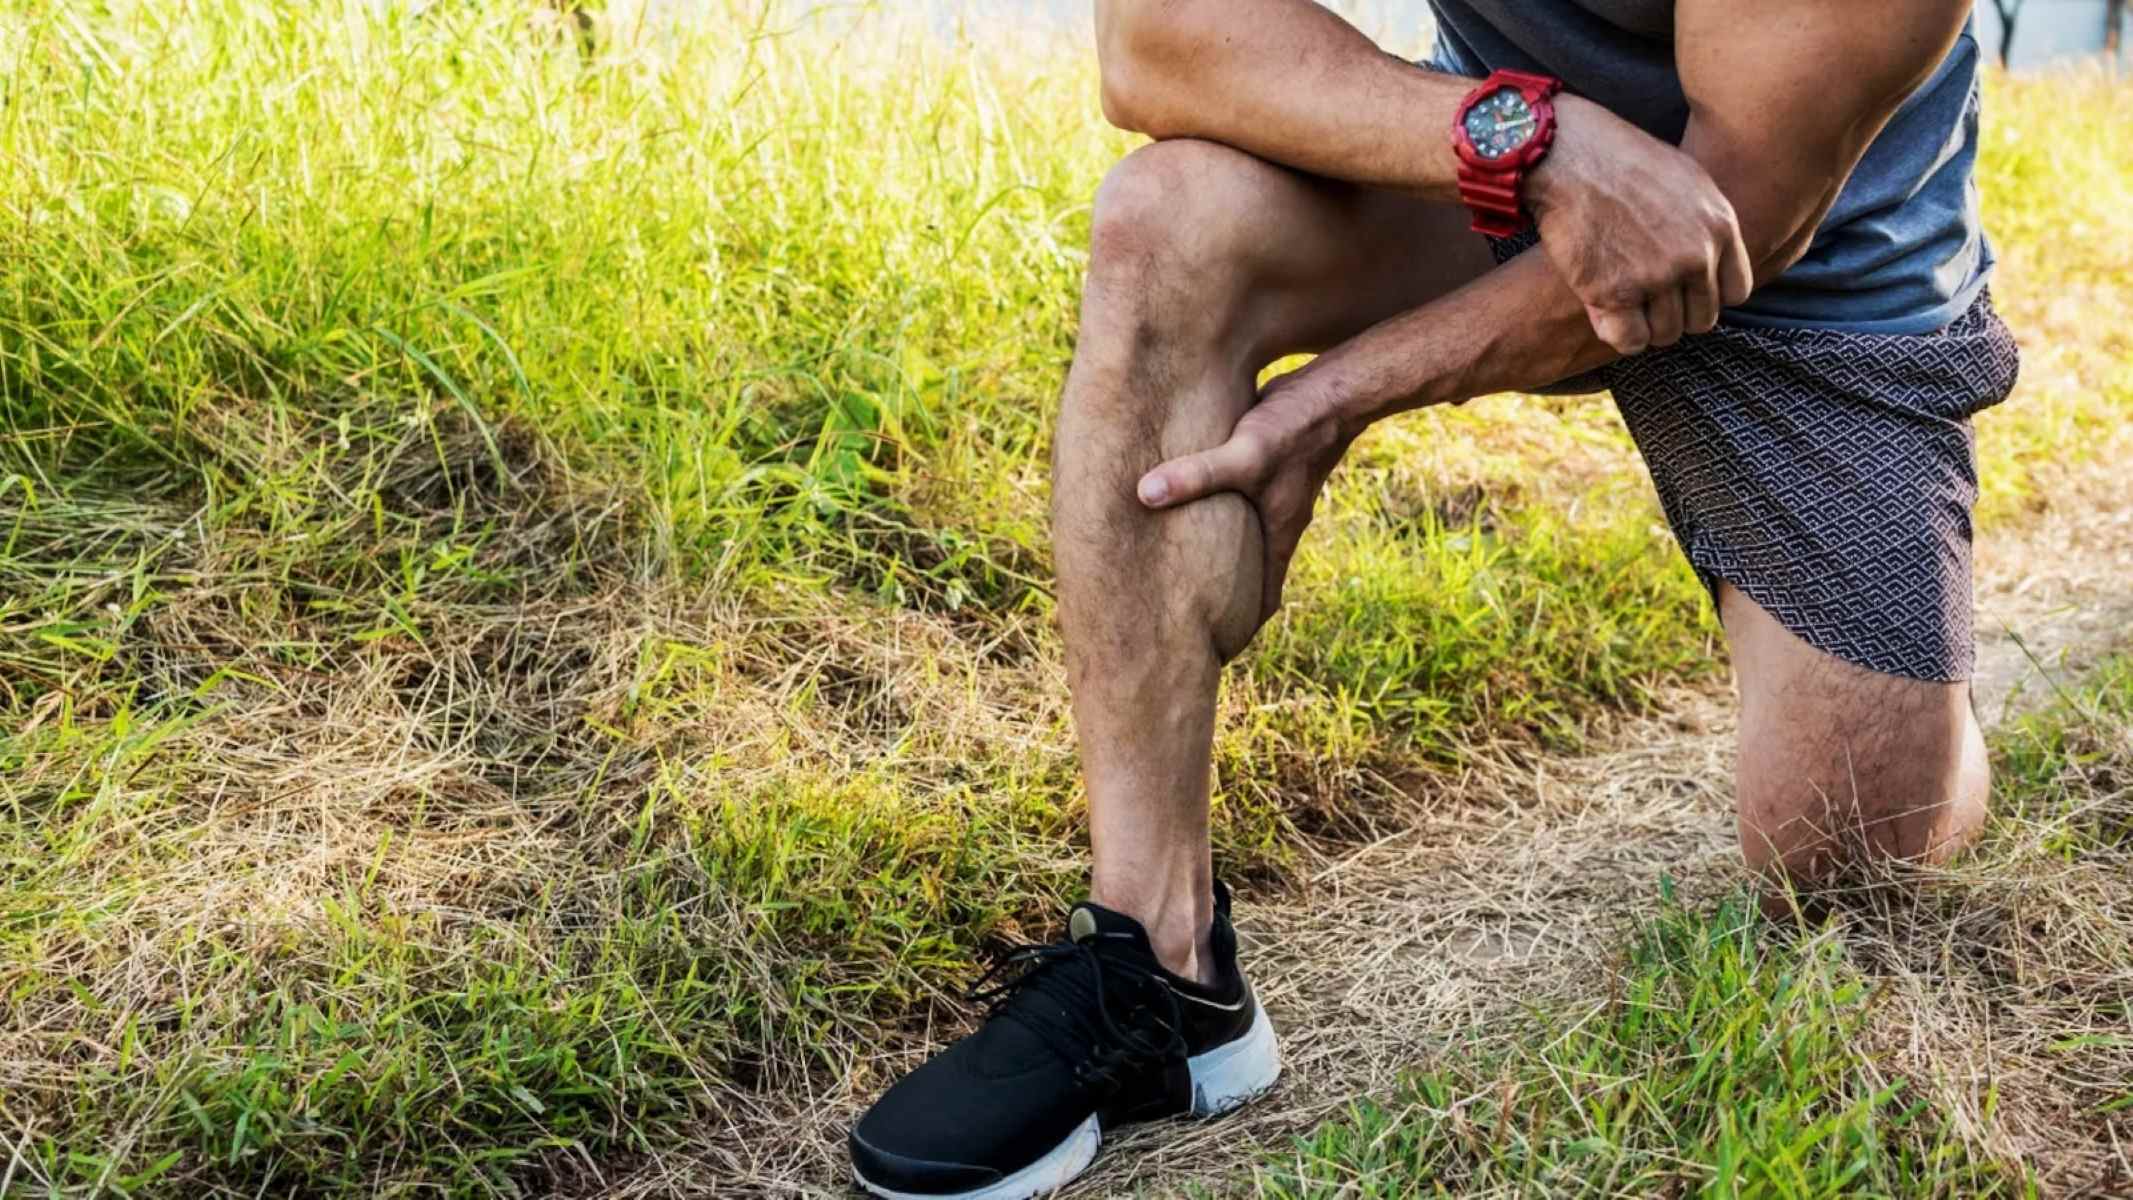 Understanding The Occurrence Of Calf Cramps During Running